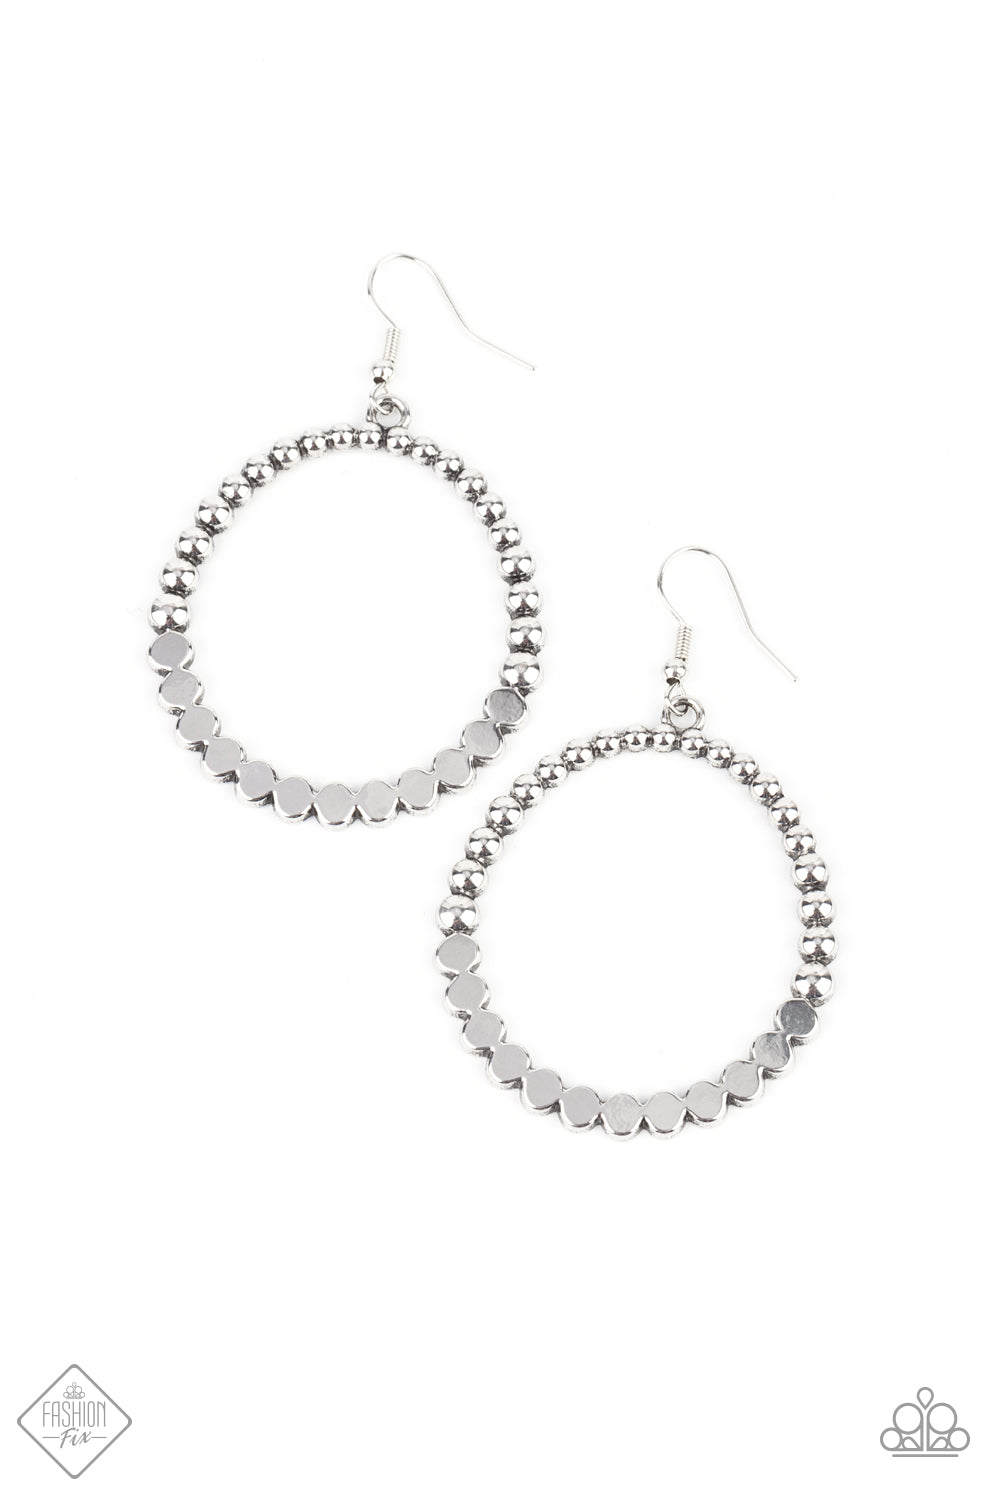 Paparazzi Accessories - Rustic Society Silver Earrings Fashion Fix July 2021 #SSF0721